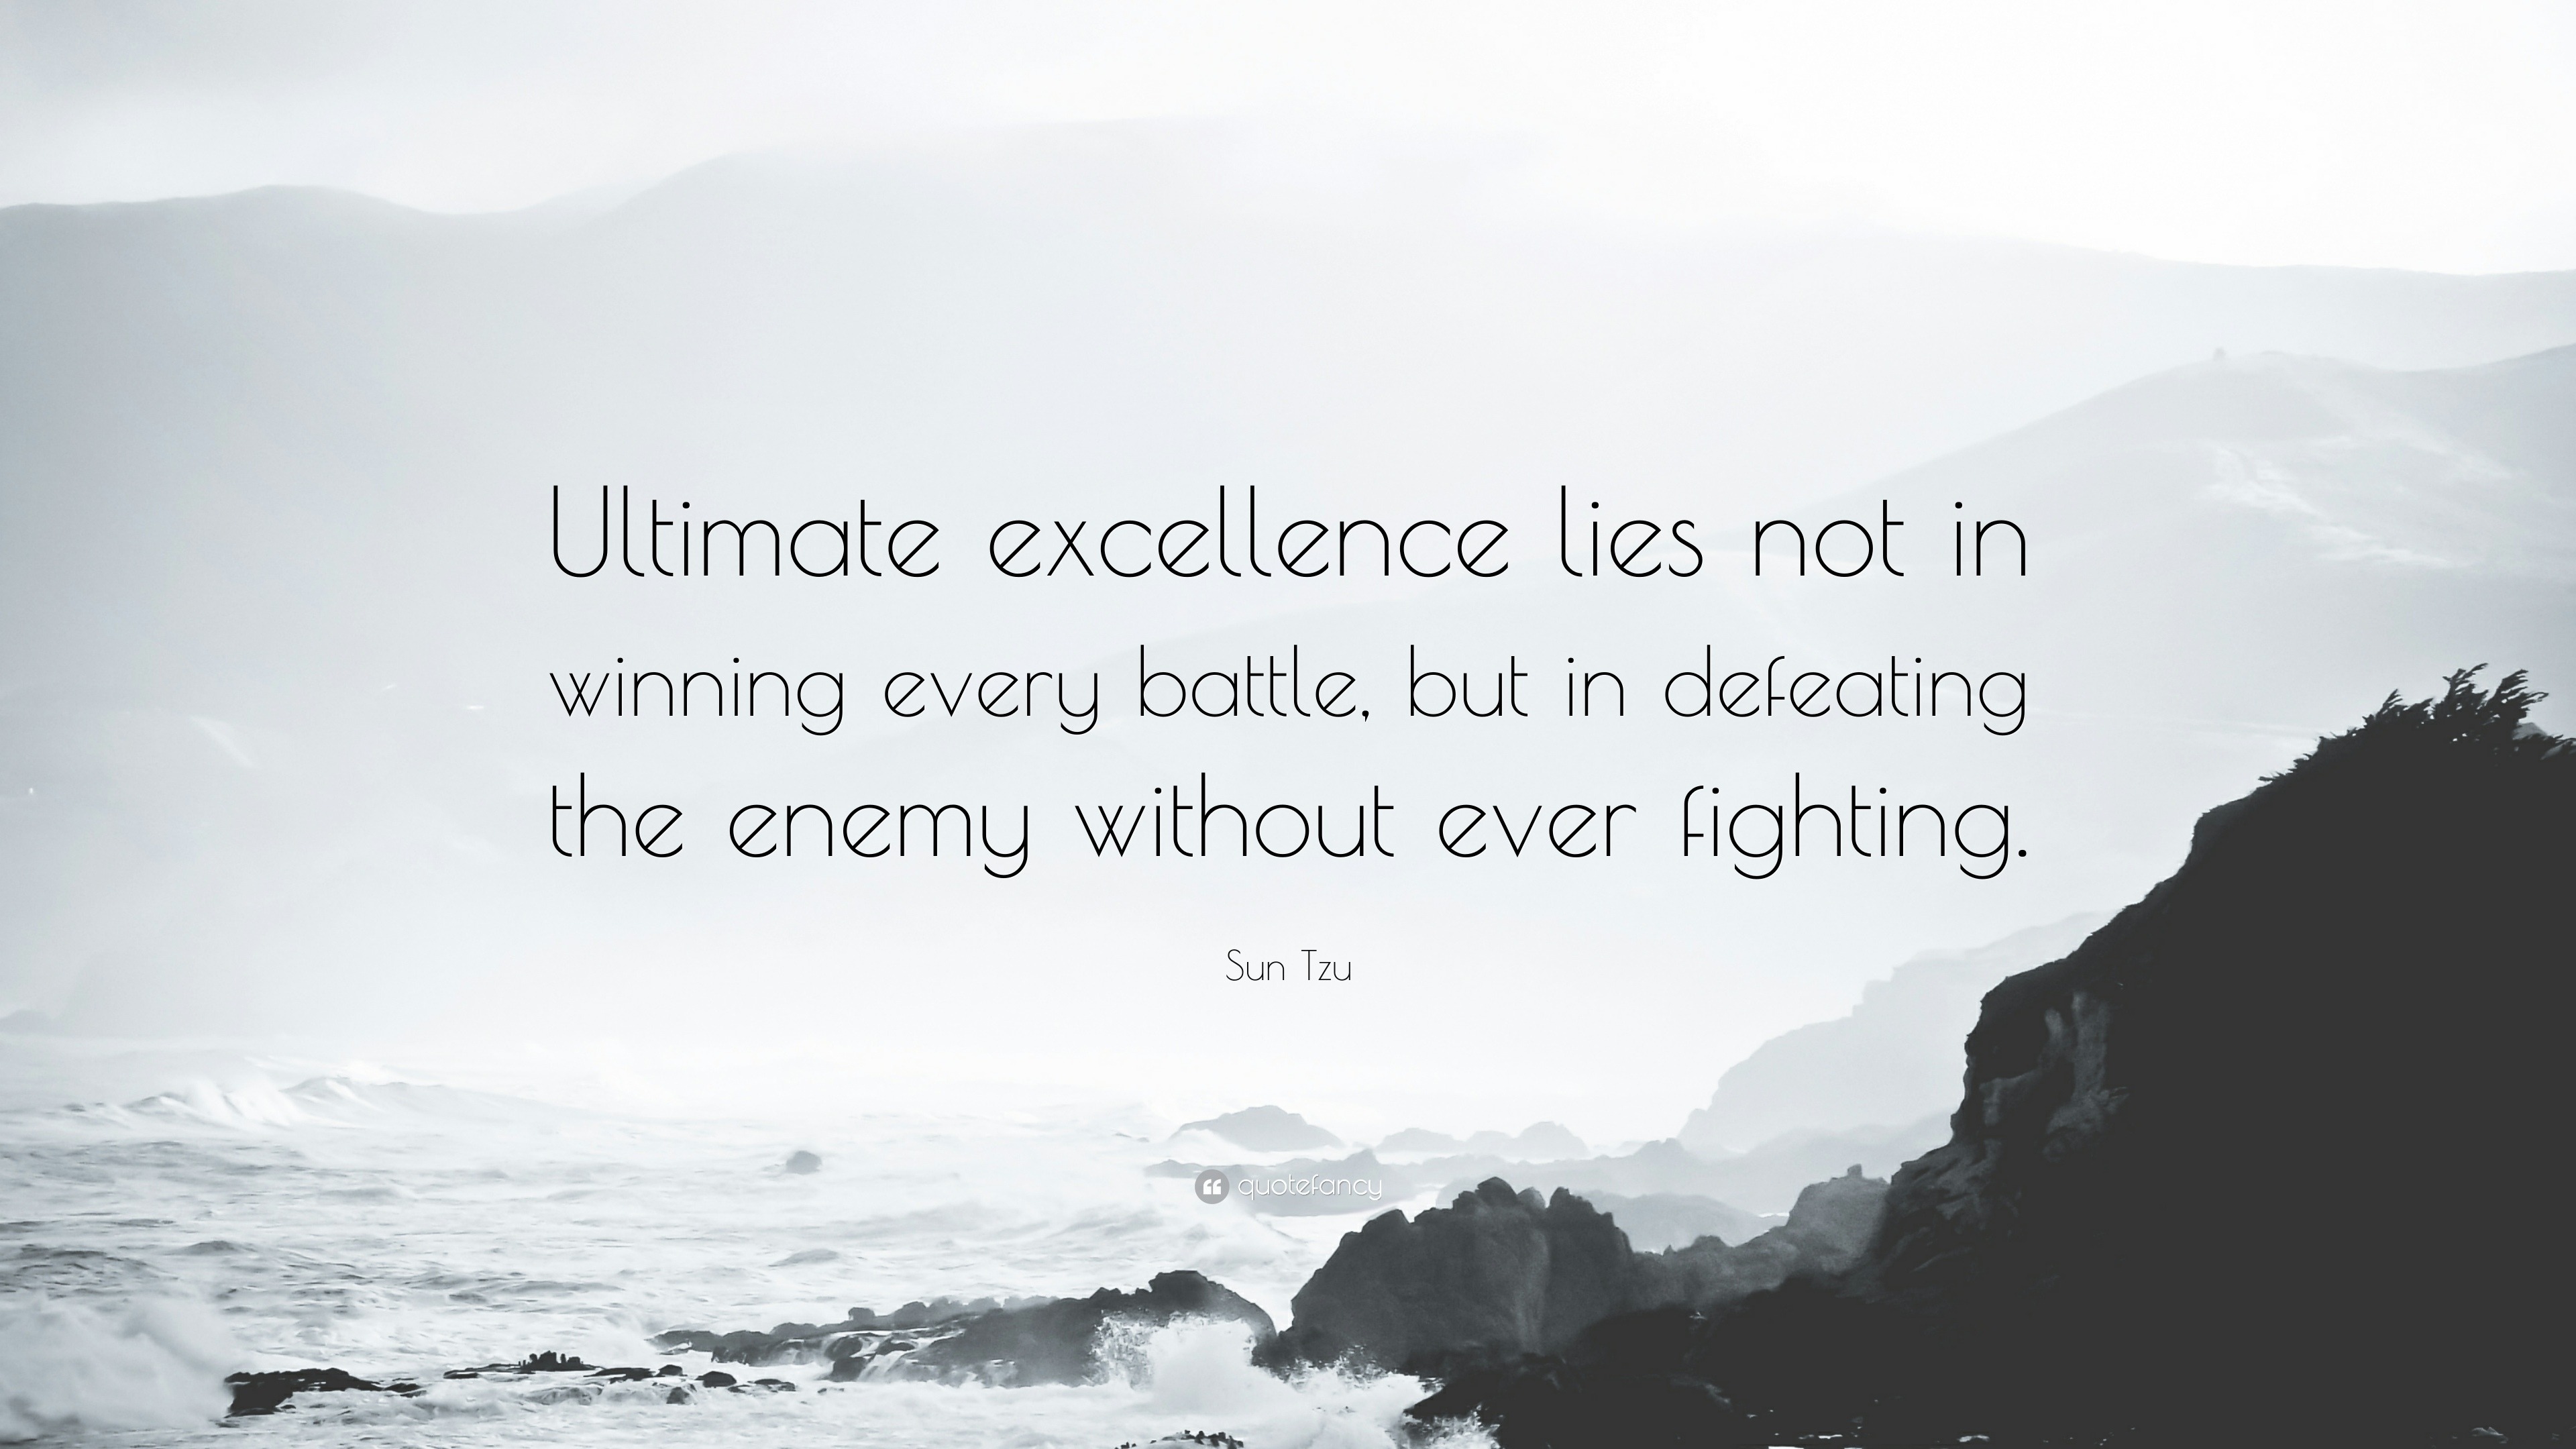 553725-Sun-Tzu-Quote-Ultimate-excellence-lies-not-in-winning-every-battle.jpg